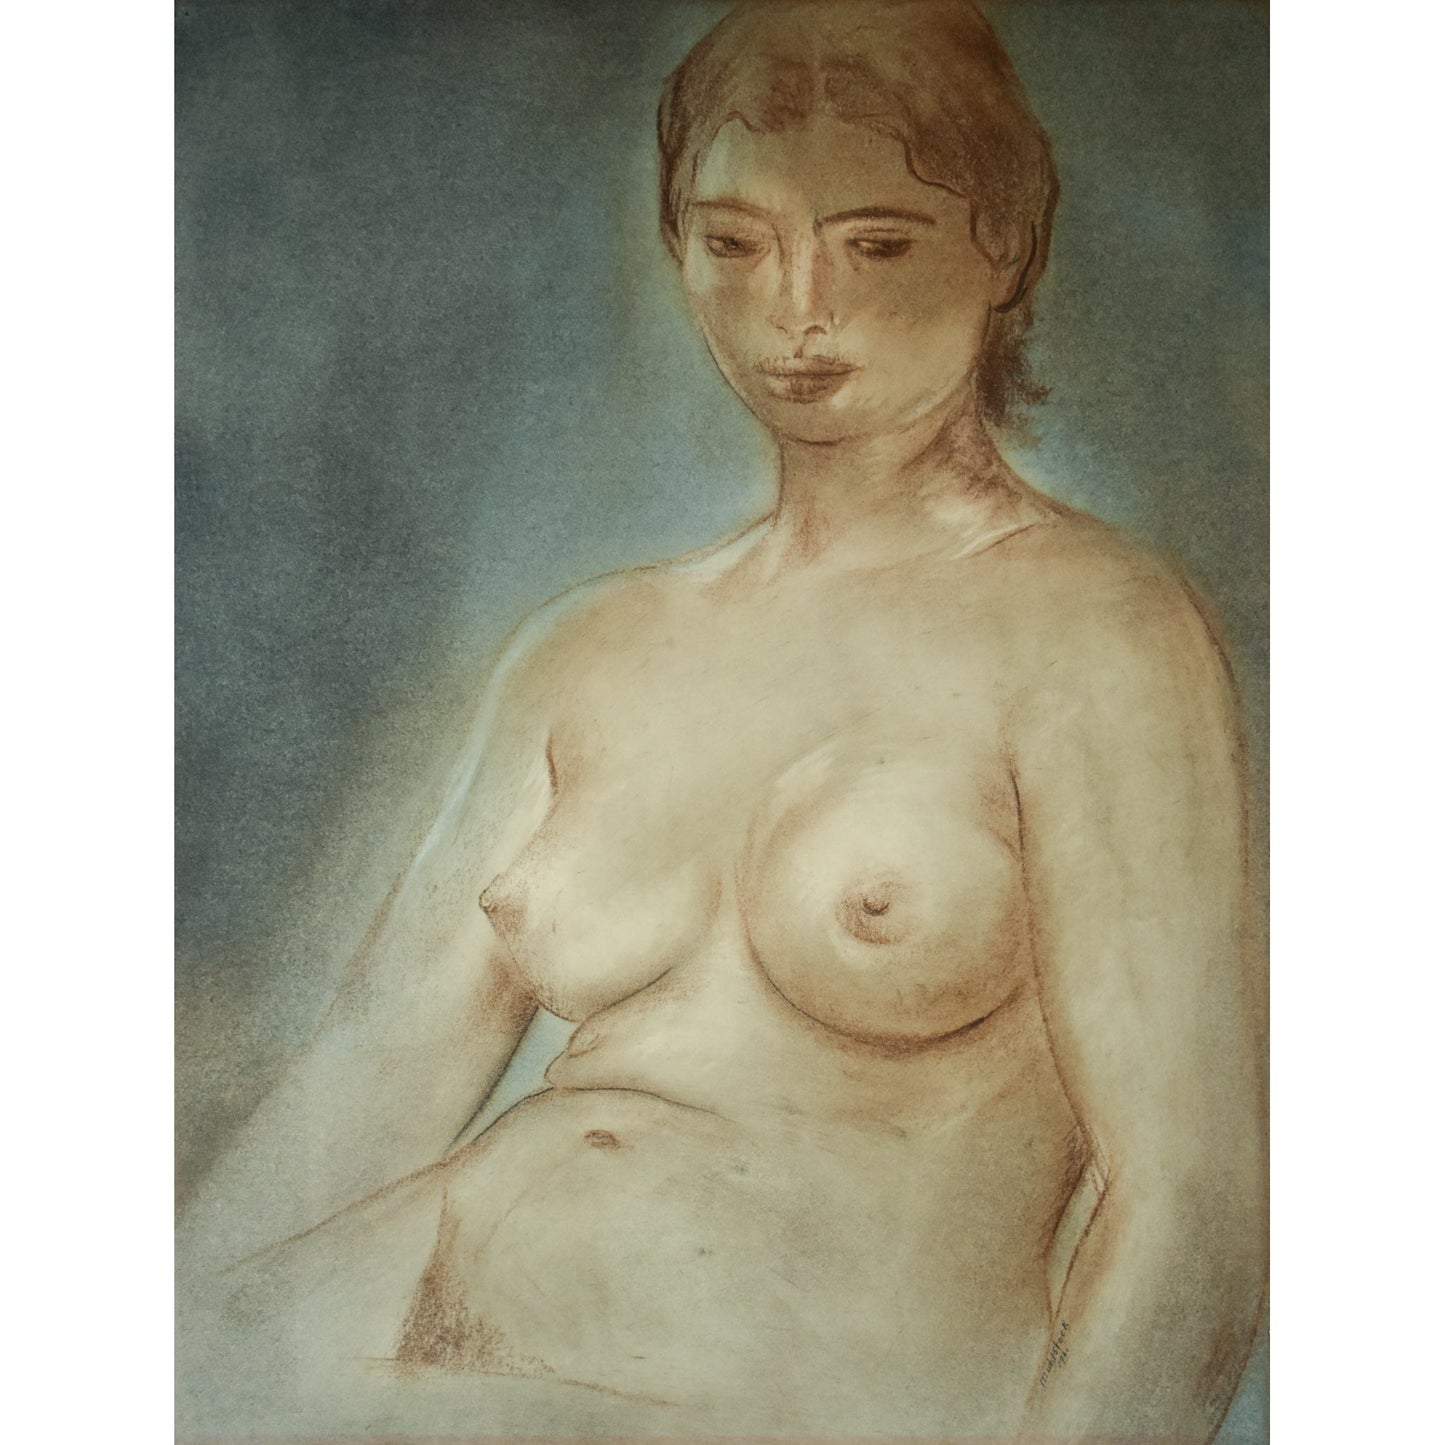 Vintage drawing pastel painting, woman nude figure original 1960, by Louis Muhlstock, for sale at Winckelmann Gallery